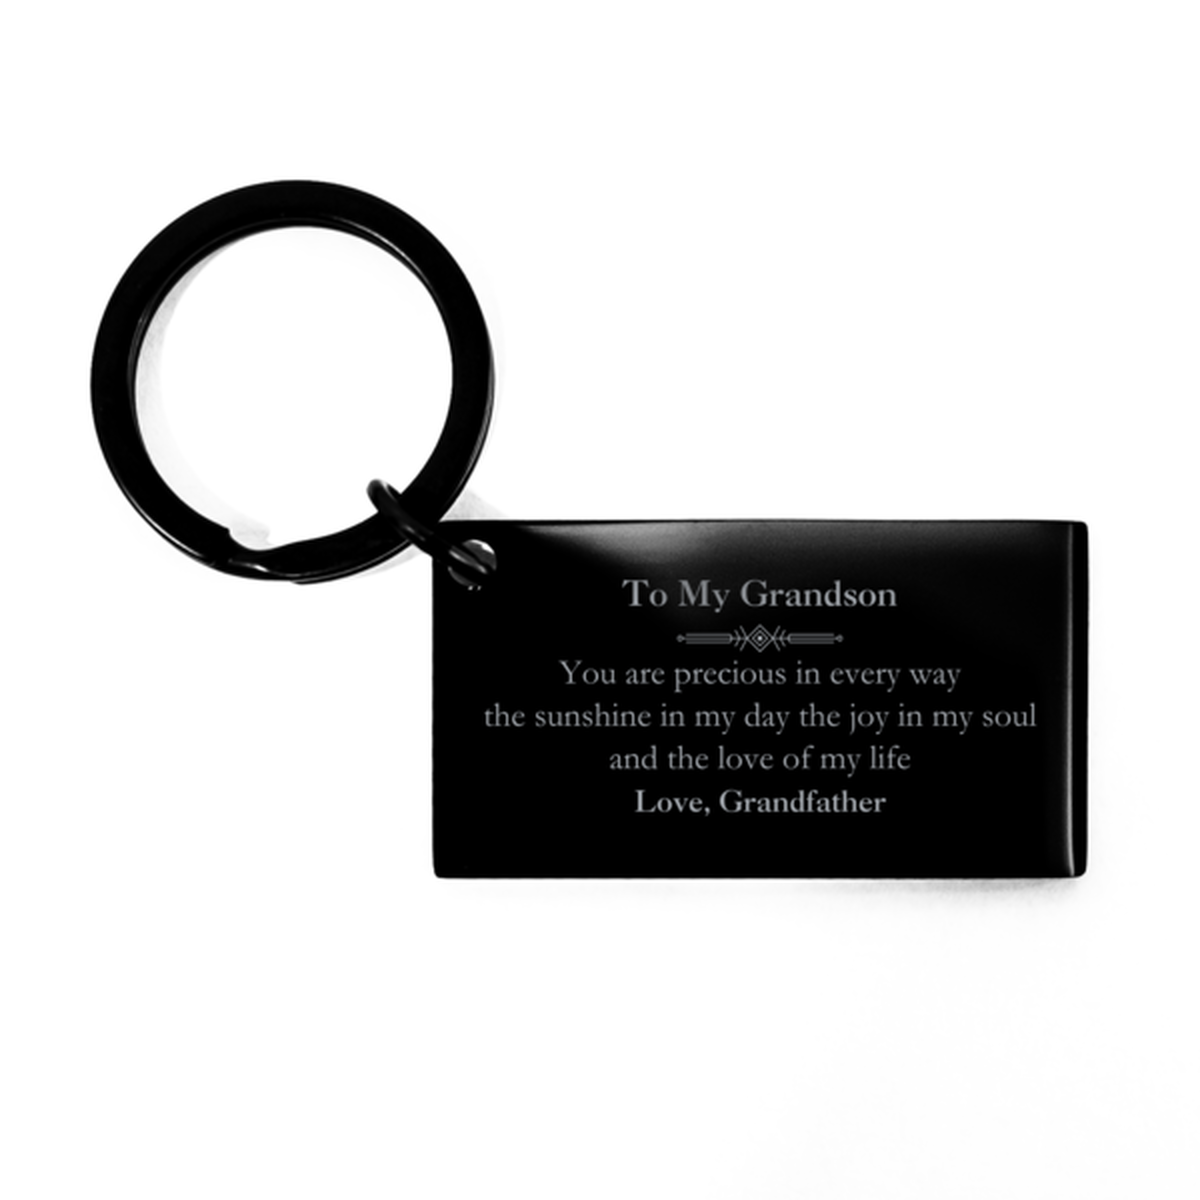 Graduation Gifts for Grandson Keychain Present from Grandfather, Christmas Grandson Birthday Gifts Grandson You are precious in every way the sunshine in my day. Love, Grandfather